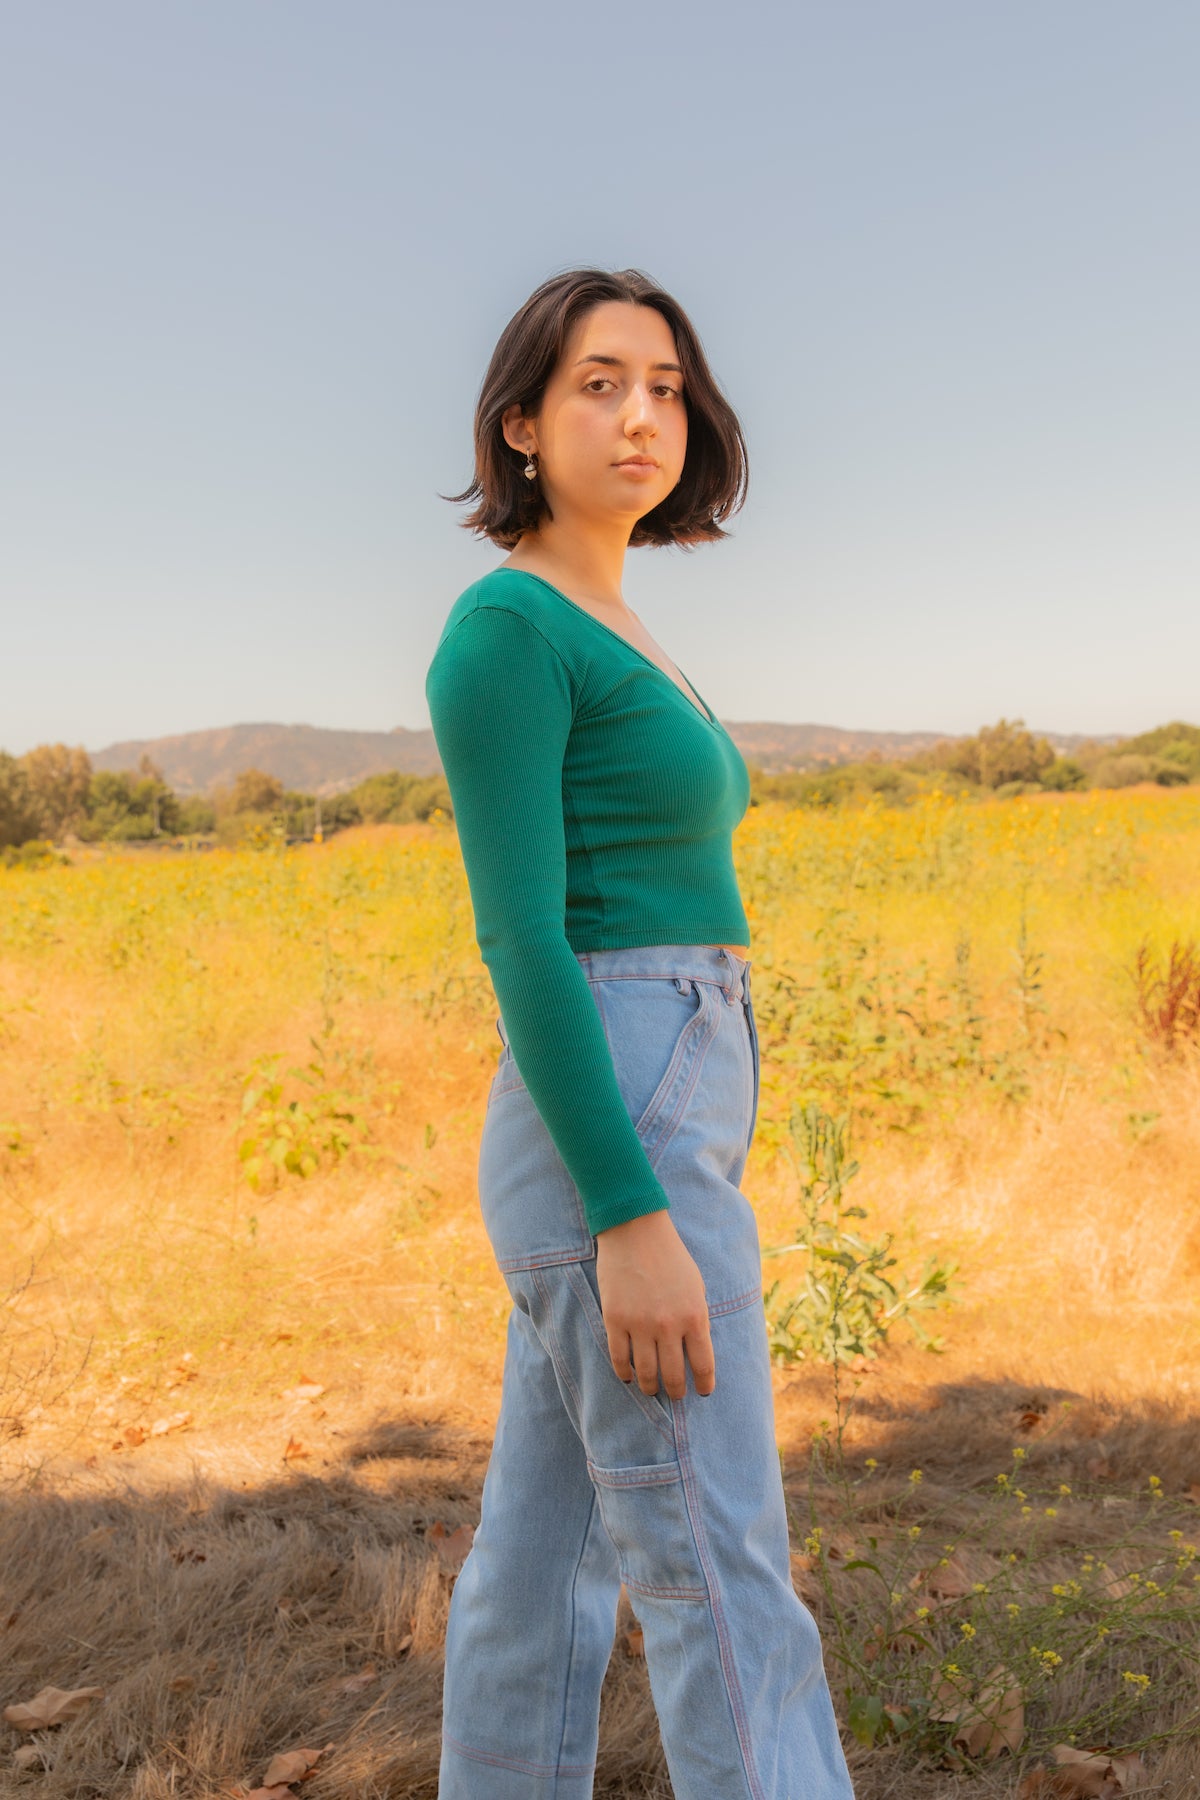 Betty is wearing Long Sleeve V-Neck in Hunter Green and Carpenter Jeans in Light Wash